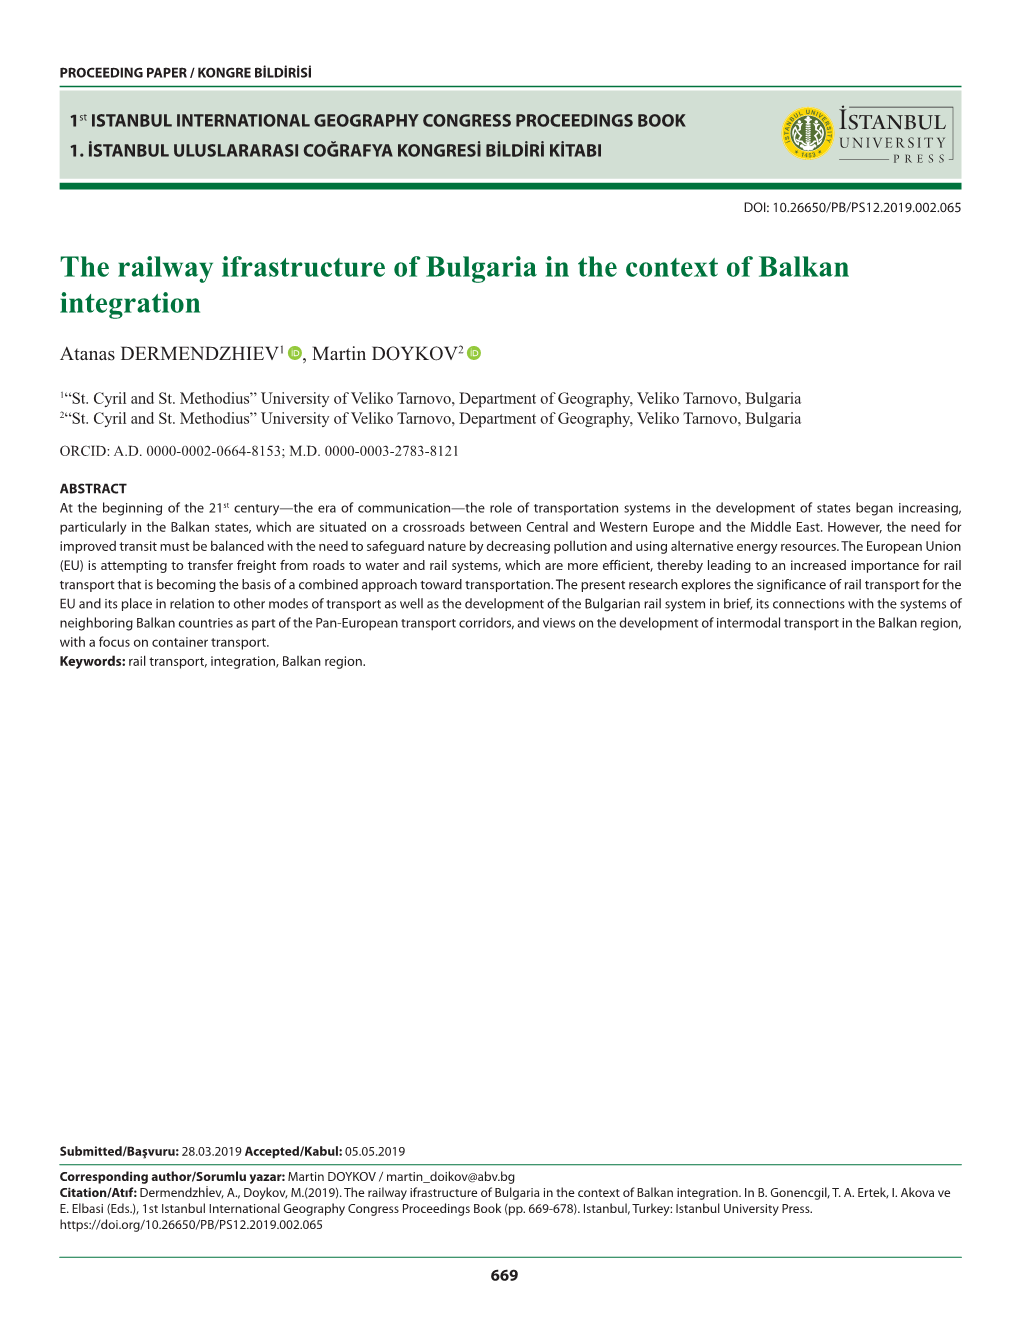 The Railway Ifrastructure of Bulgaria in the Context of Balkan Integration